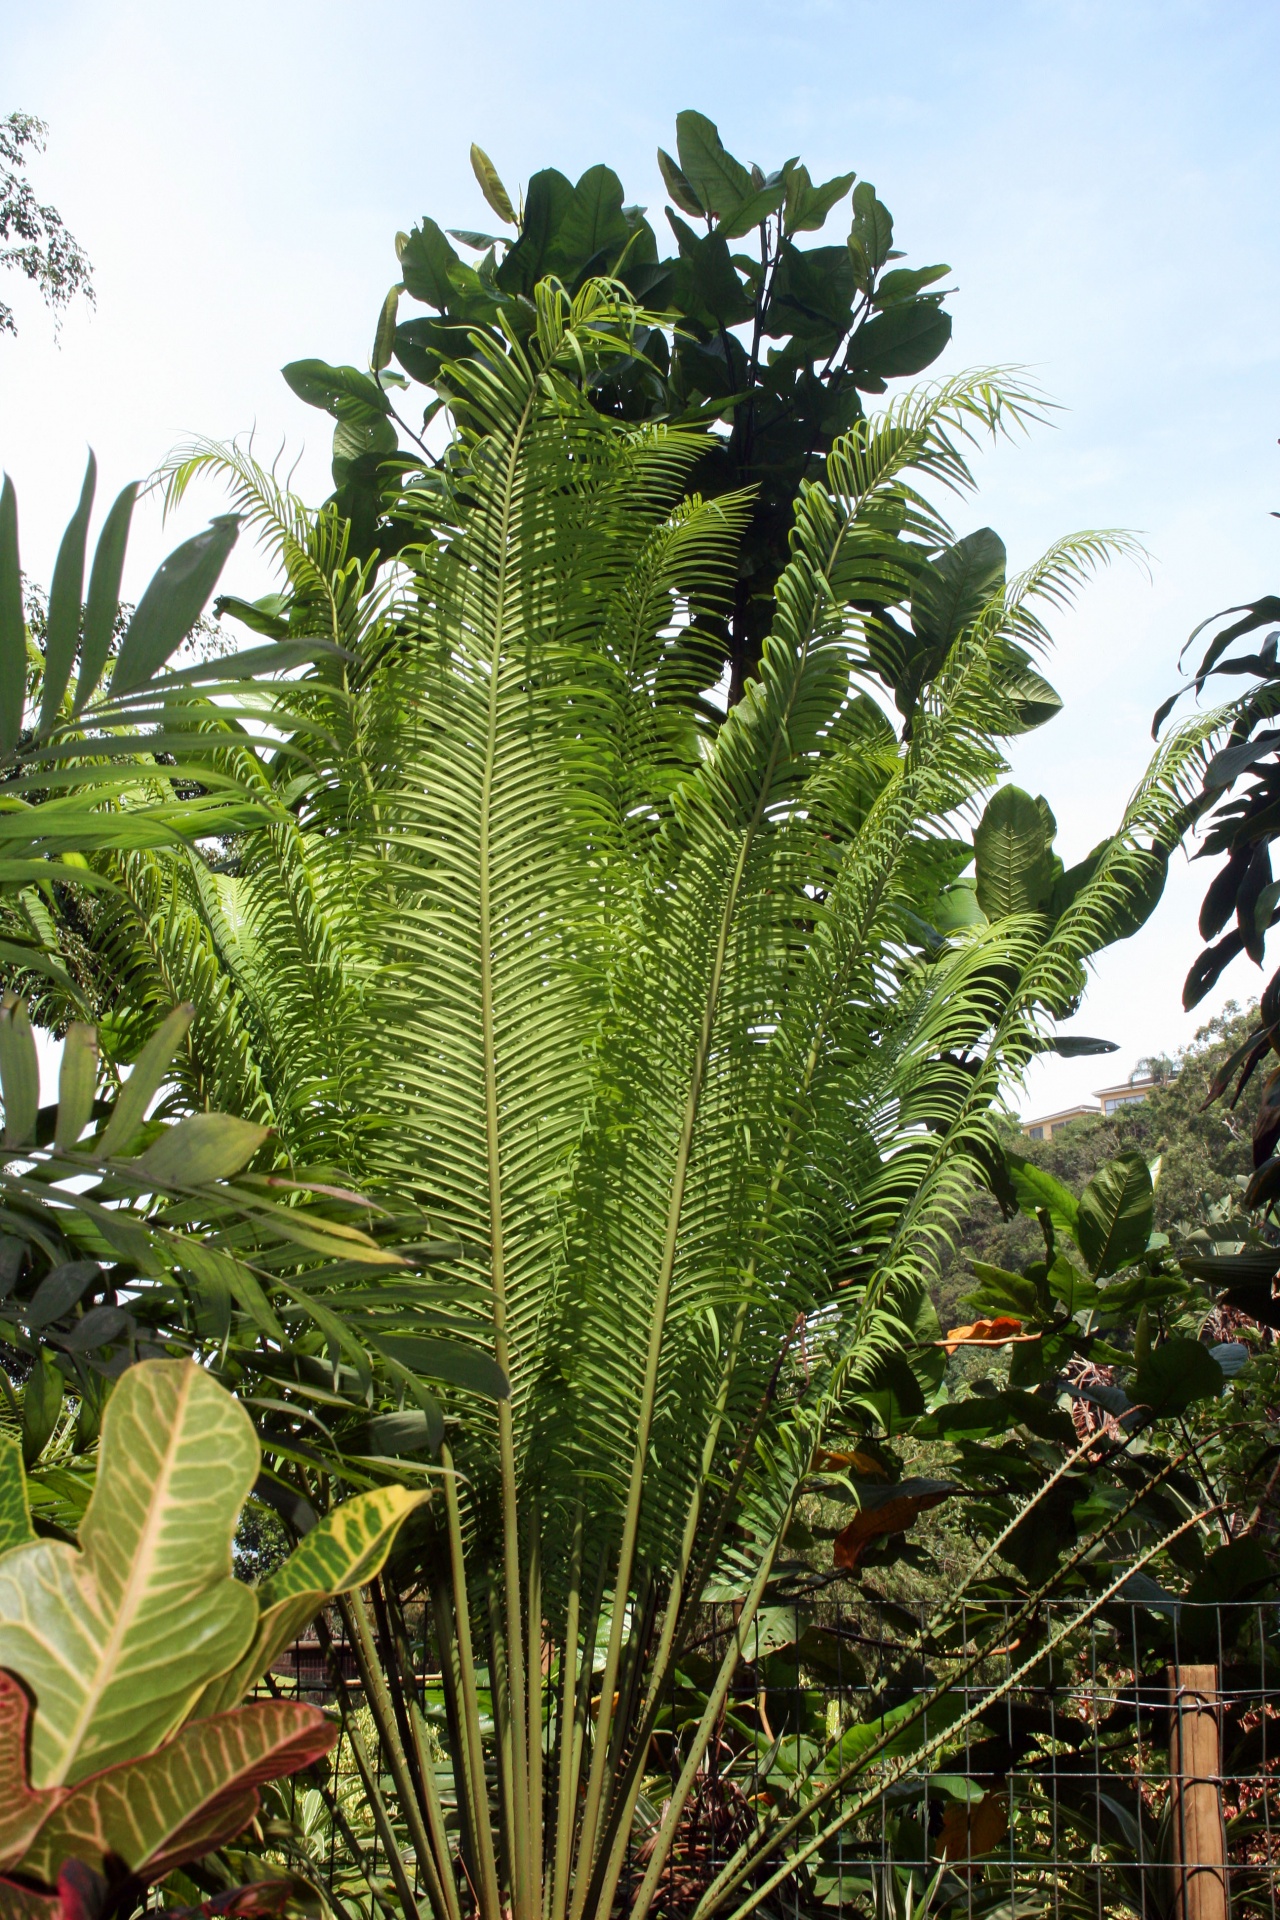 Cycad And Other Subtropical Plants